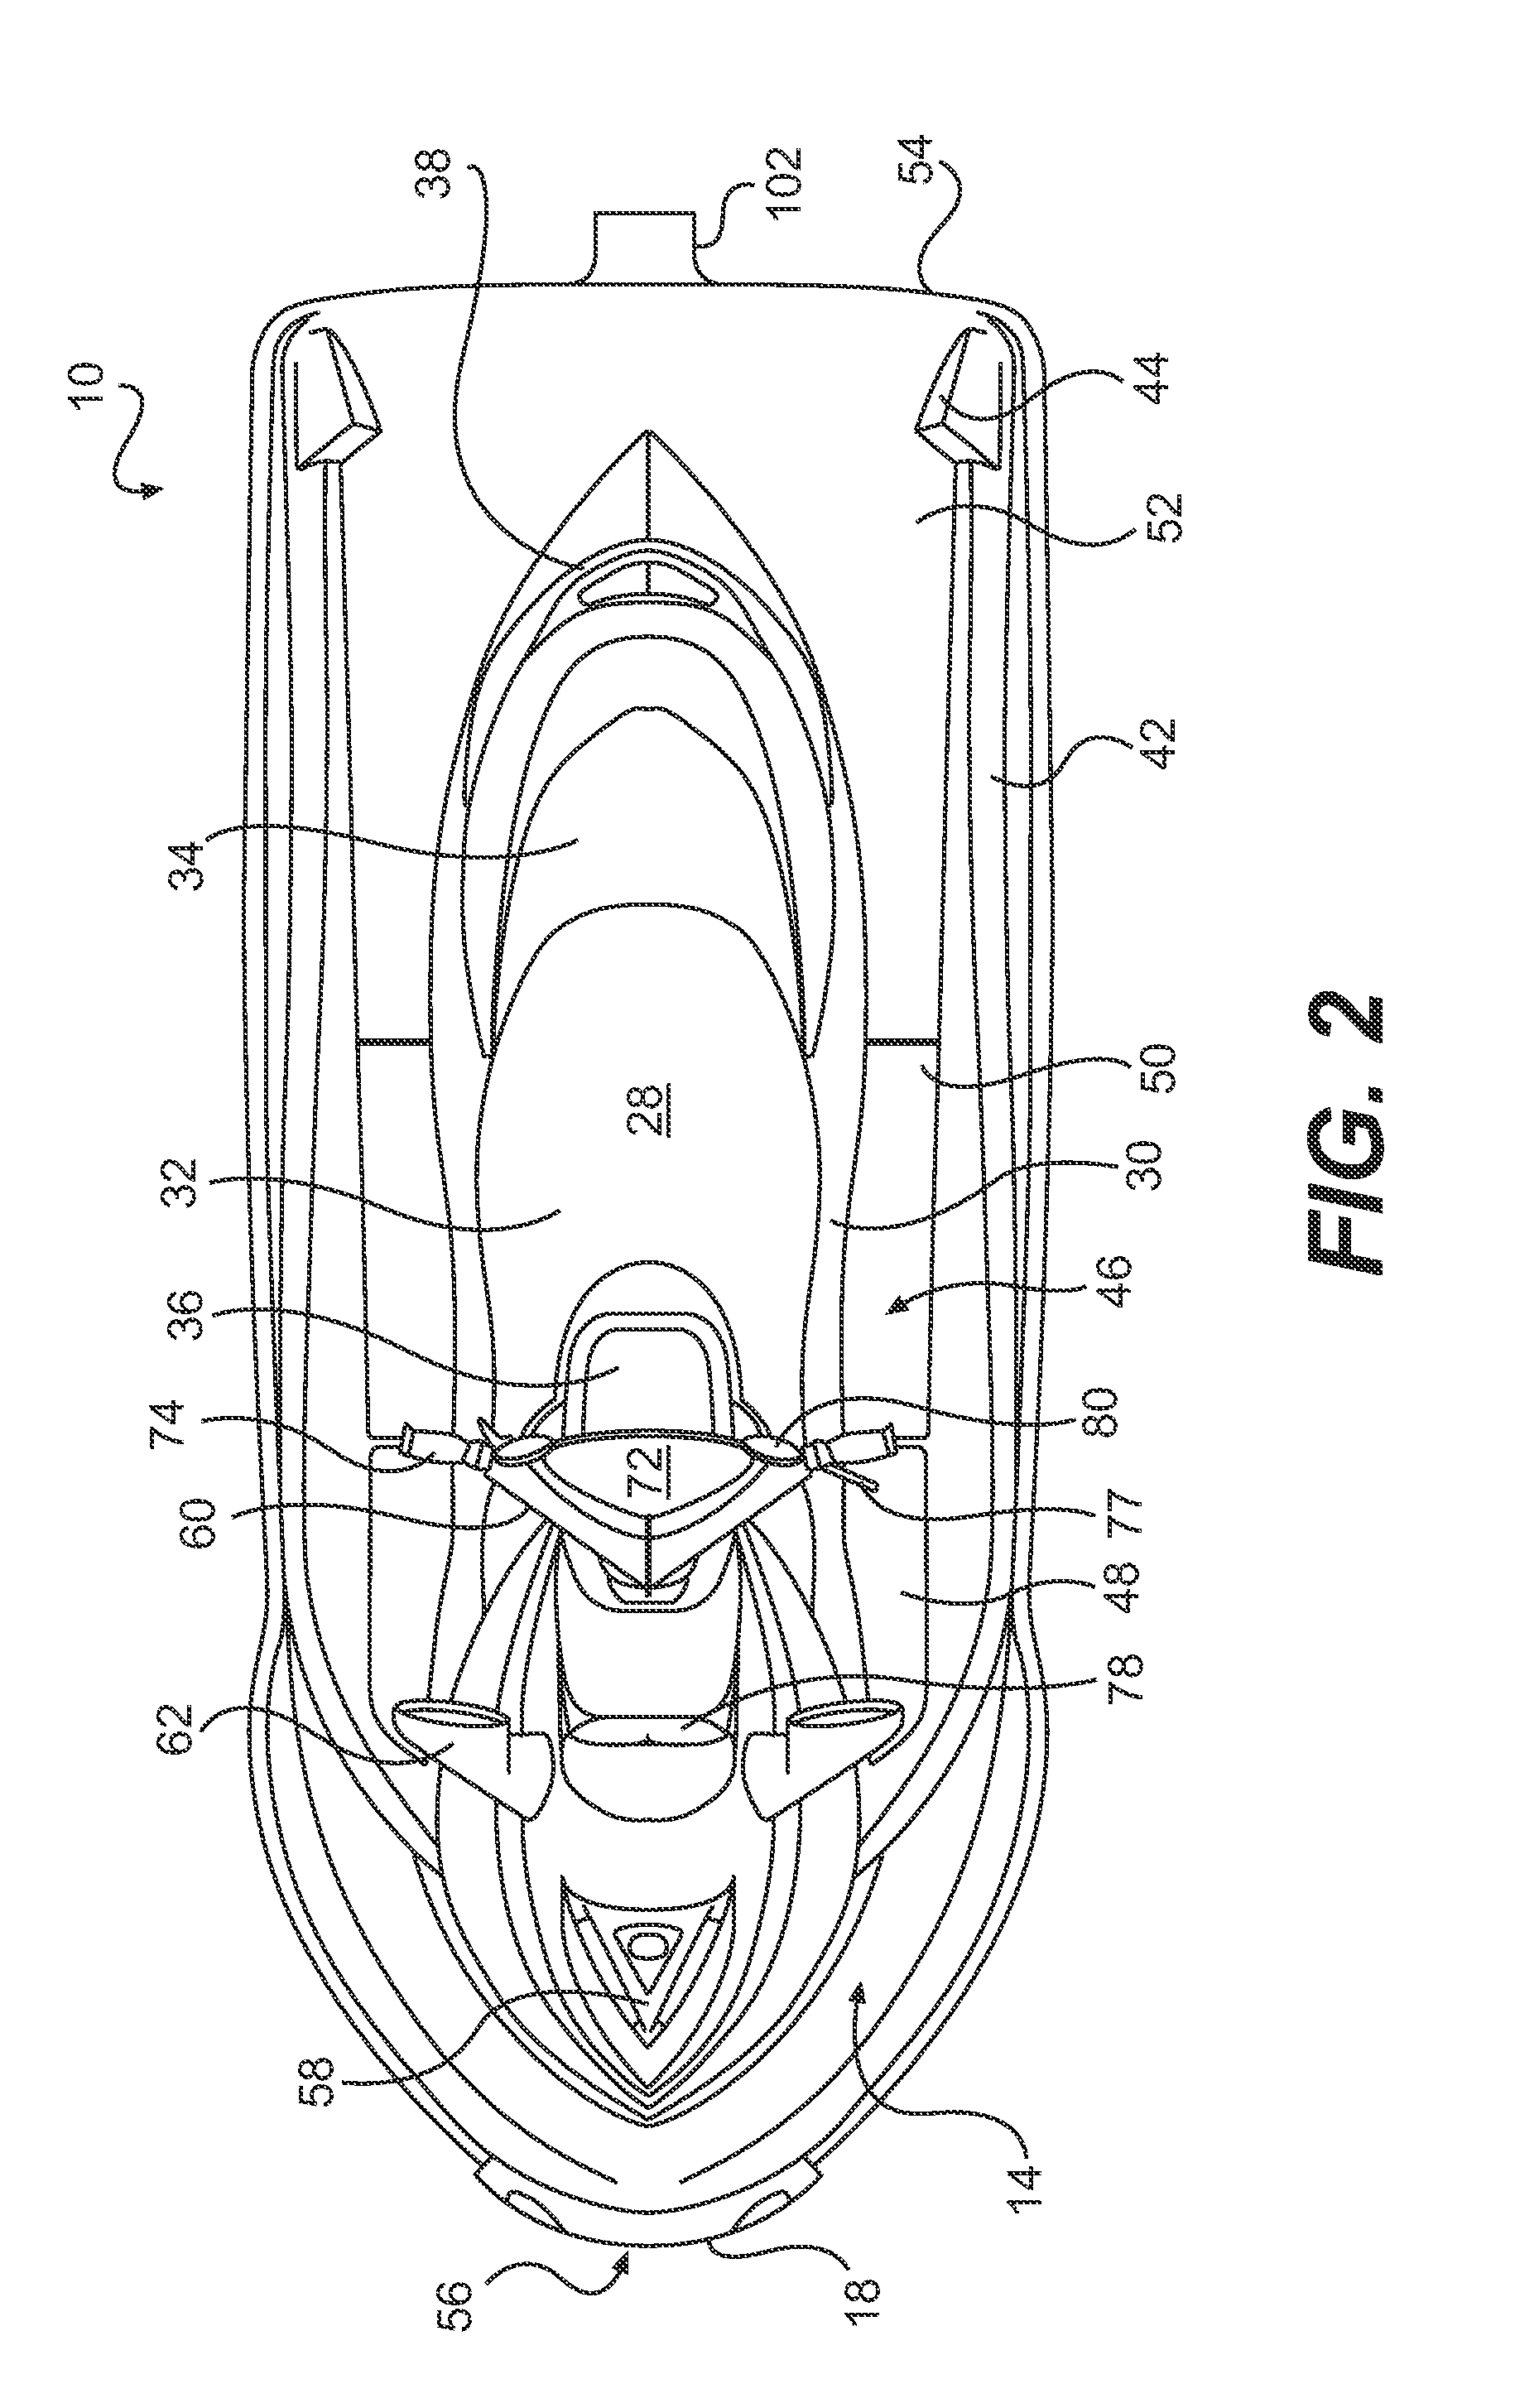 Method of indicating a deceleration of a watercraft